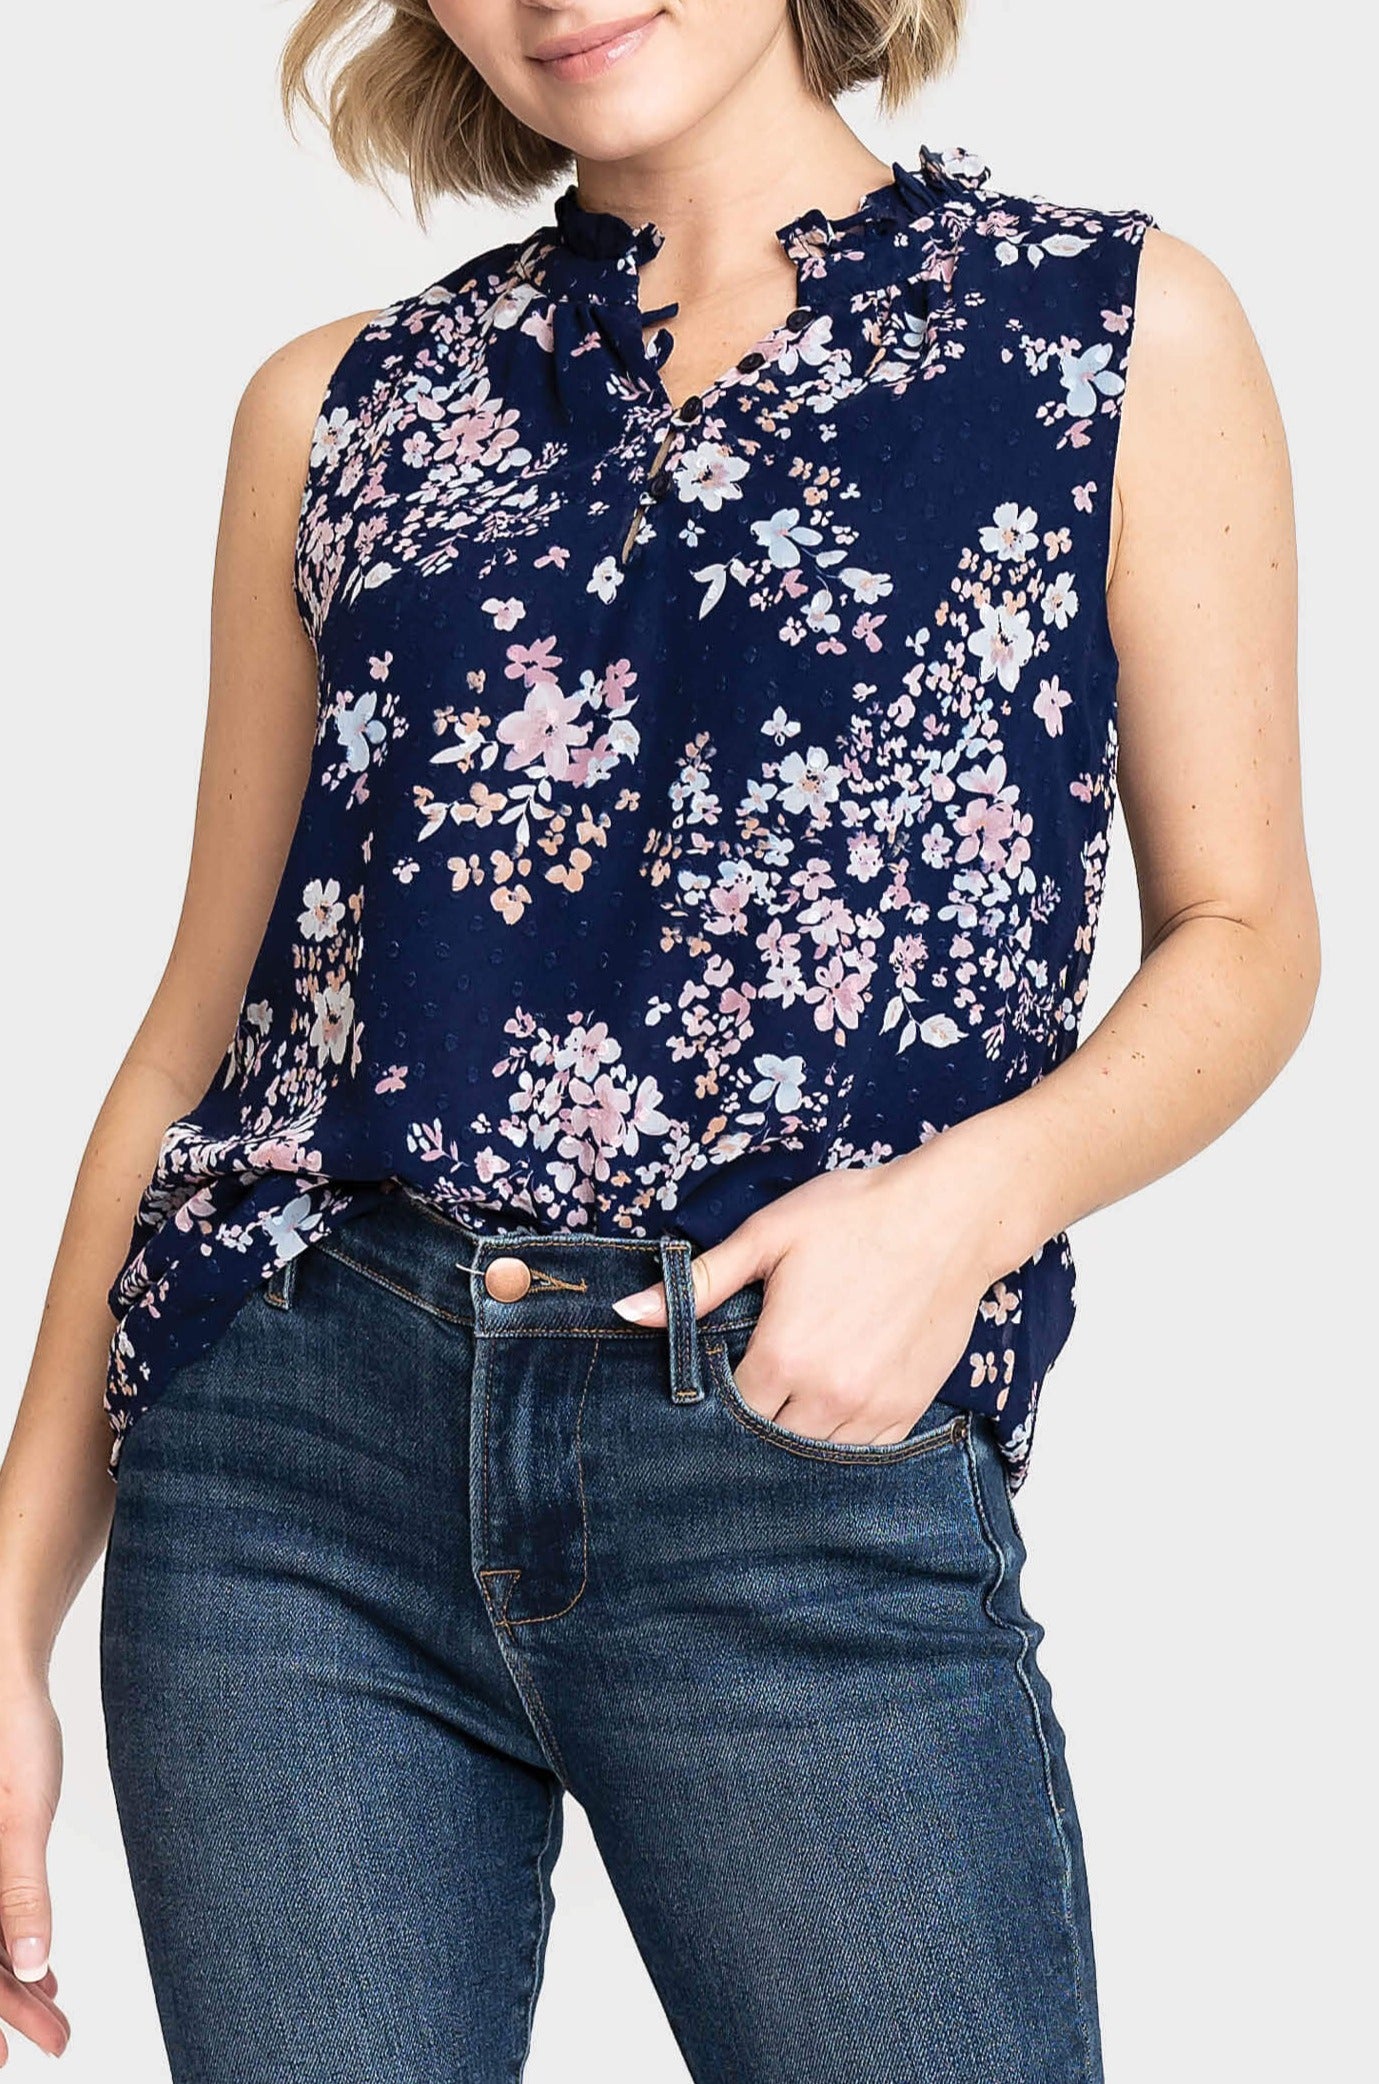 Respect the Ruffle Sleeveless Blouse - Navy Bouquet Floral S